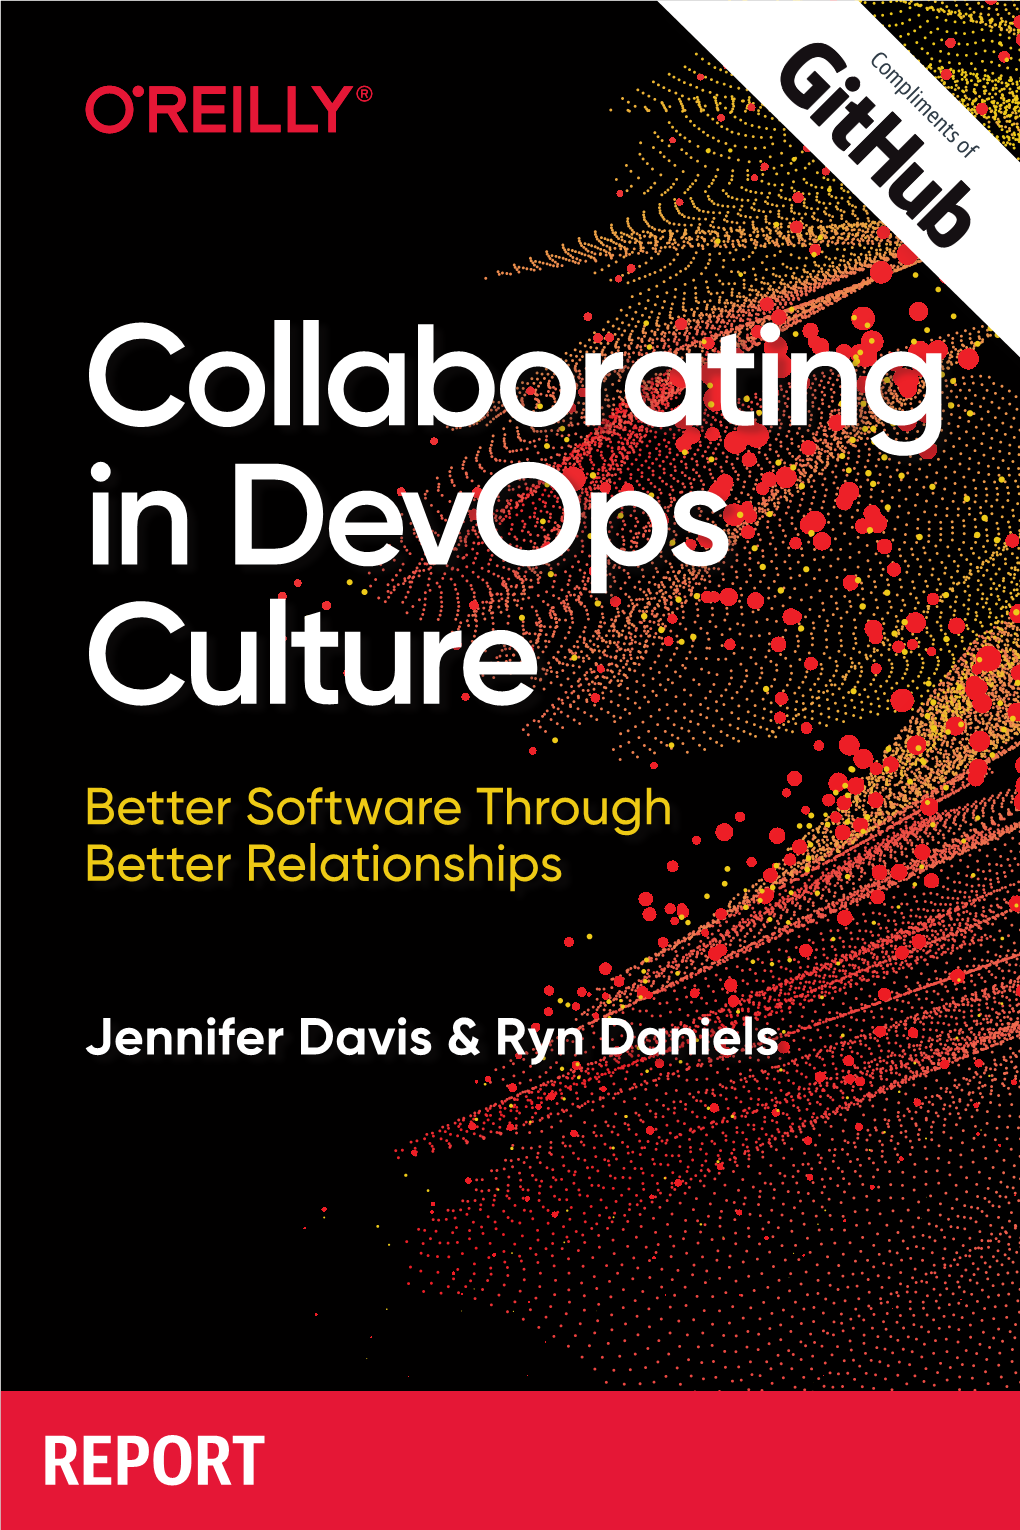 O'reilly- Collaborating in Devops Culture